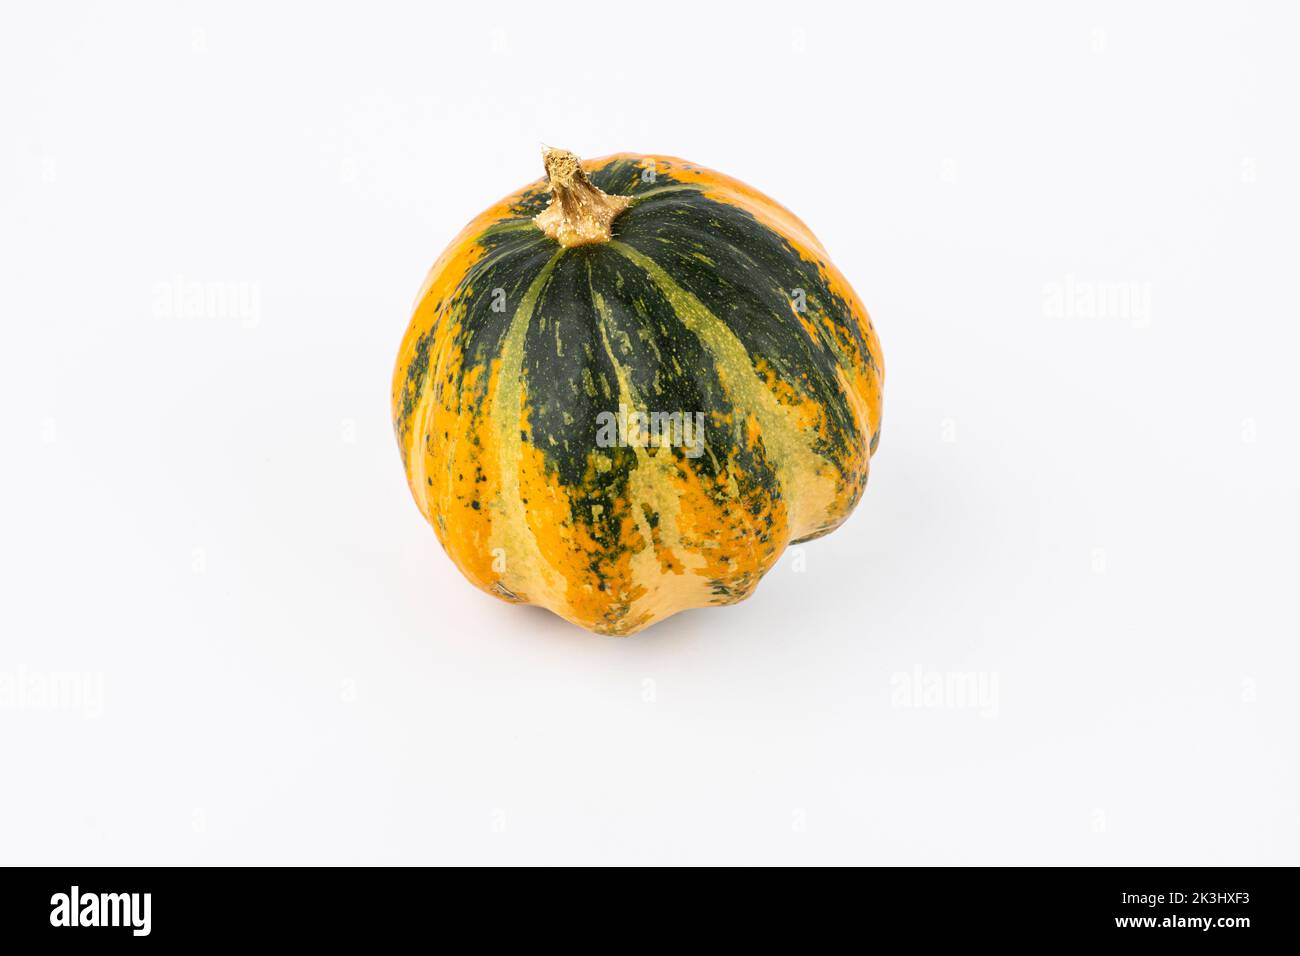 Shapely decorative gourd against a white background Stock Photo